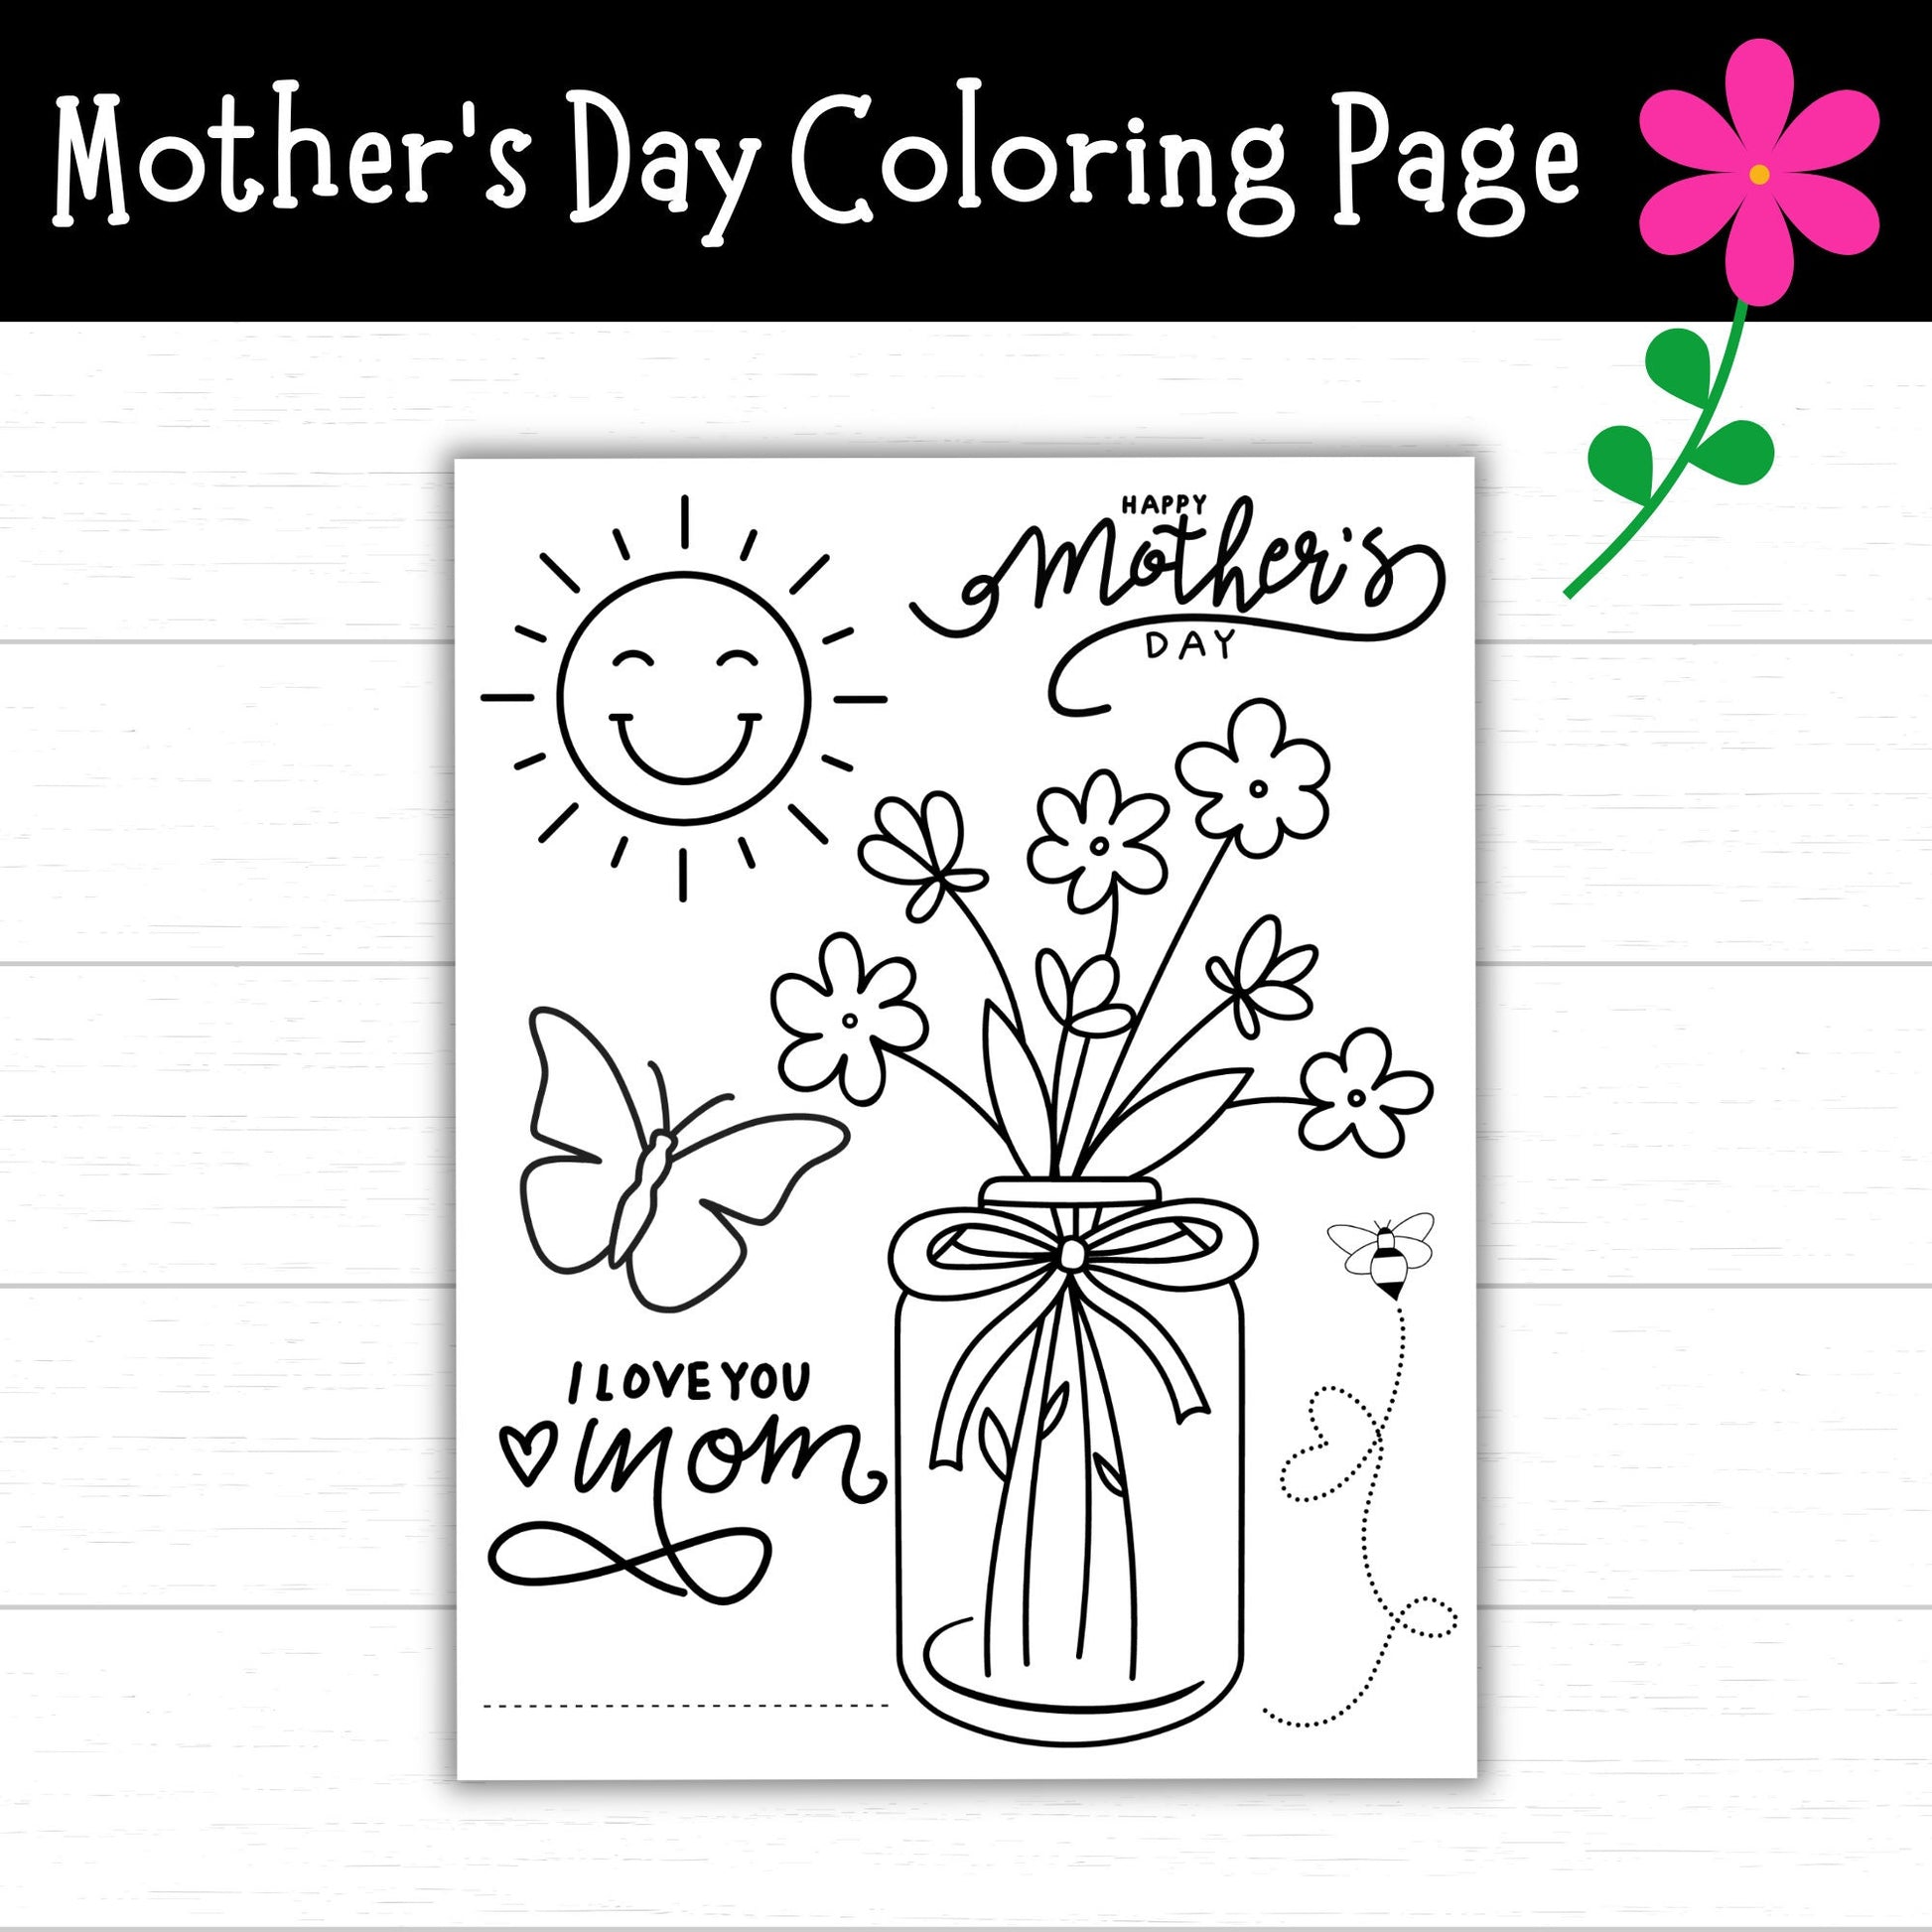 Mother's Day Coloring Page, Printable Coloring Page for Mom, DIY Mother's Day Gift Idea, Mother's Day Printable Card, DIY Gift Idea for Mom